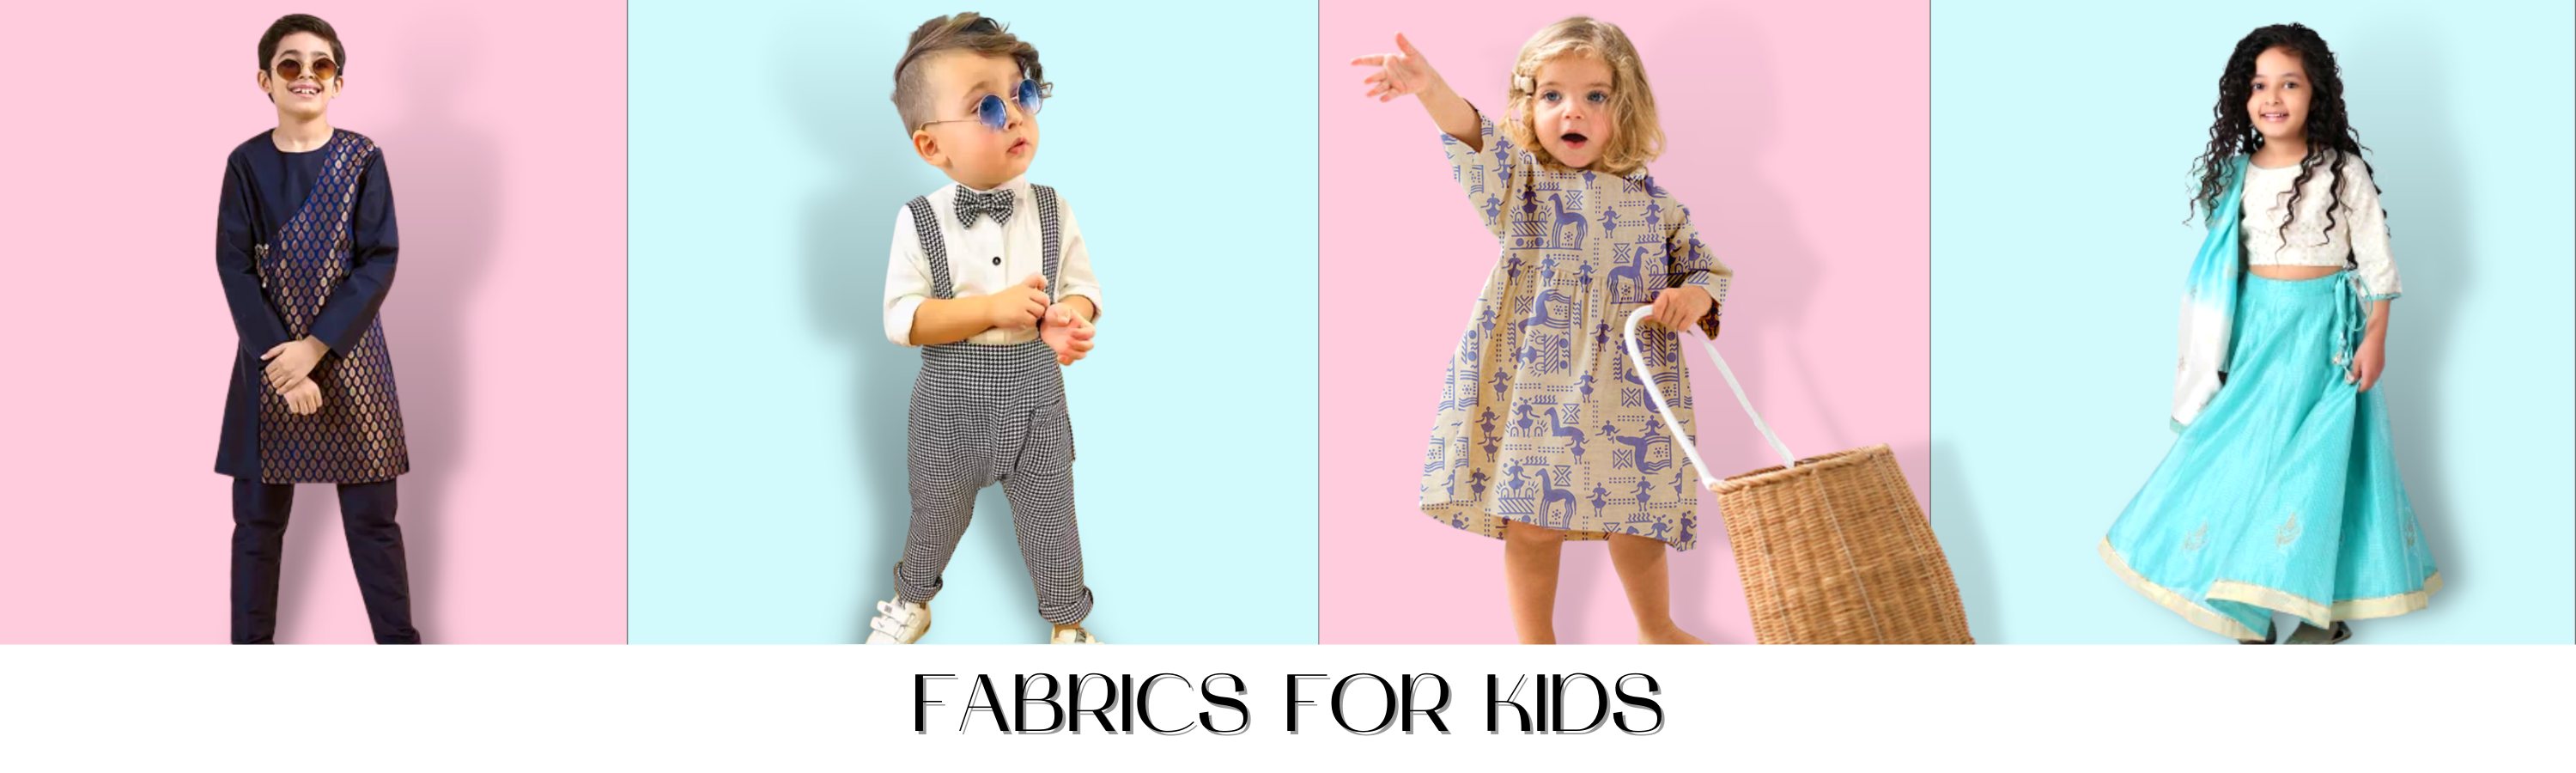 Fabric For Kids